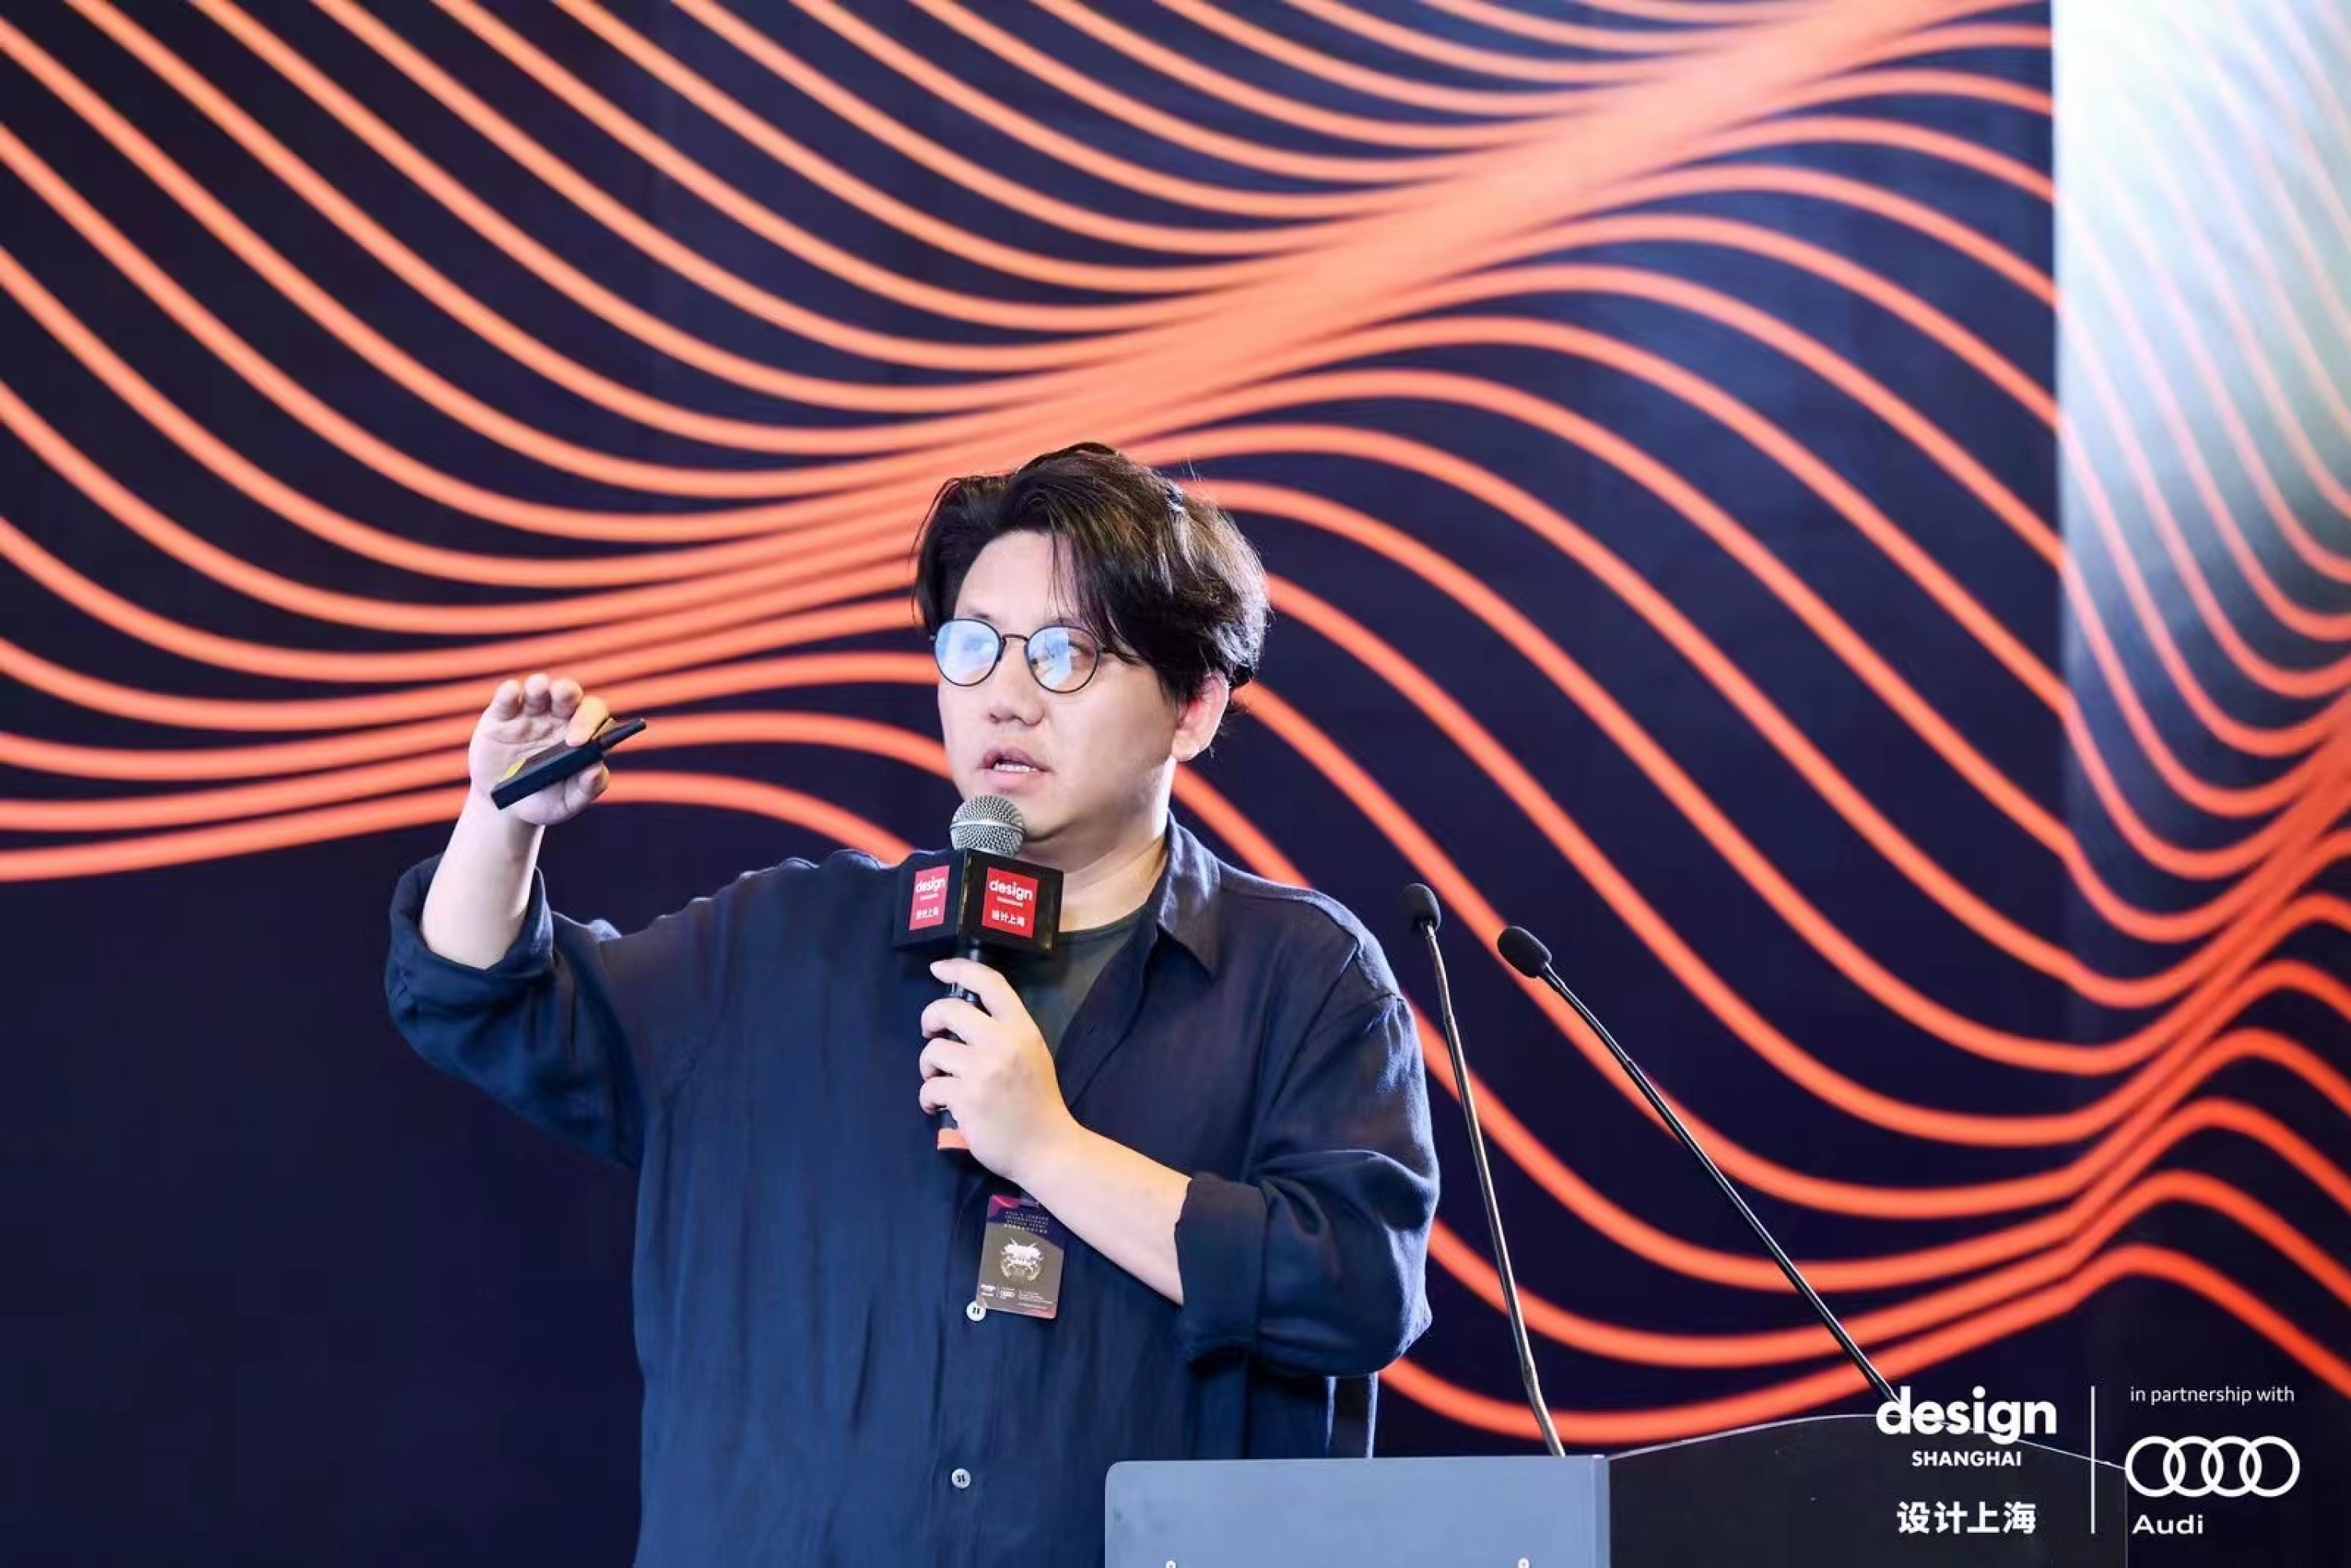 Zigeng Wang was Invited to Participate in the “Design Shanghai" Forum and Give a Speech on “Urban Cosmologies, Cosmologic Symbiosis: Two Cases of Public Art Curation"